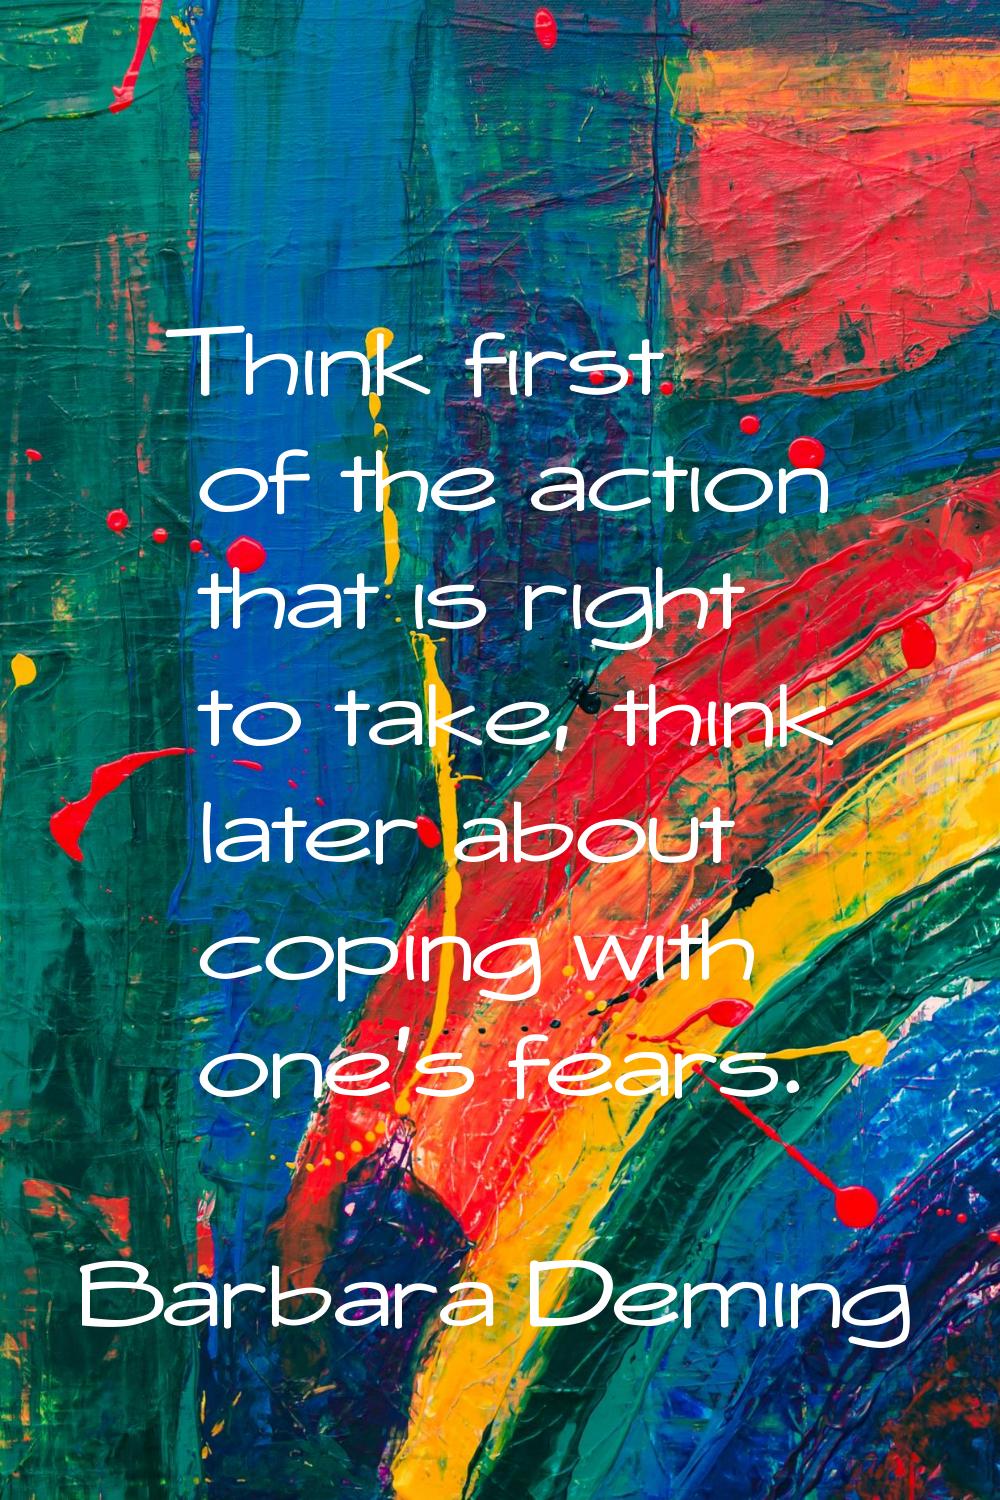 Think first of the action that is right to take, think later about coping with one's fears.